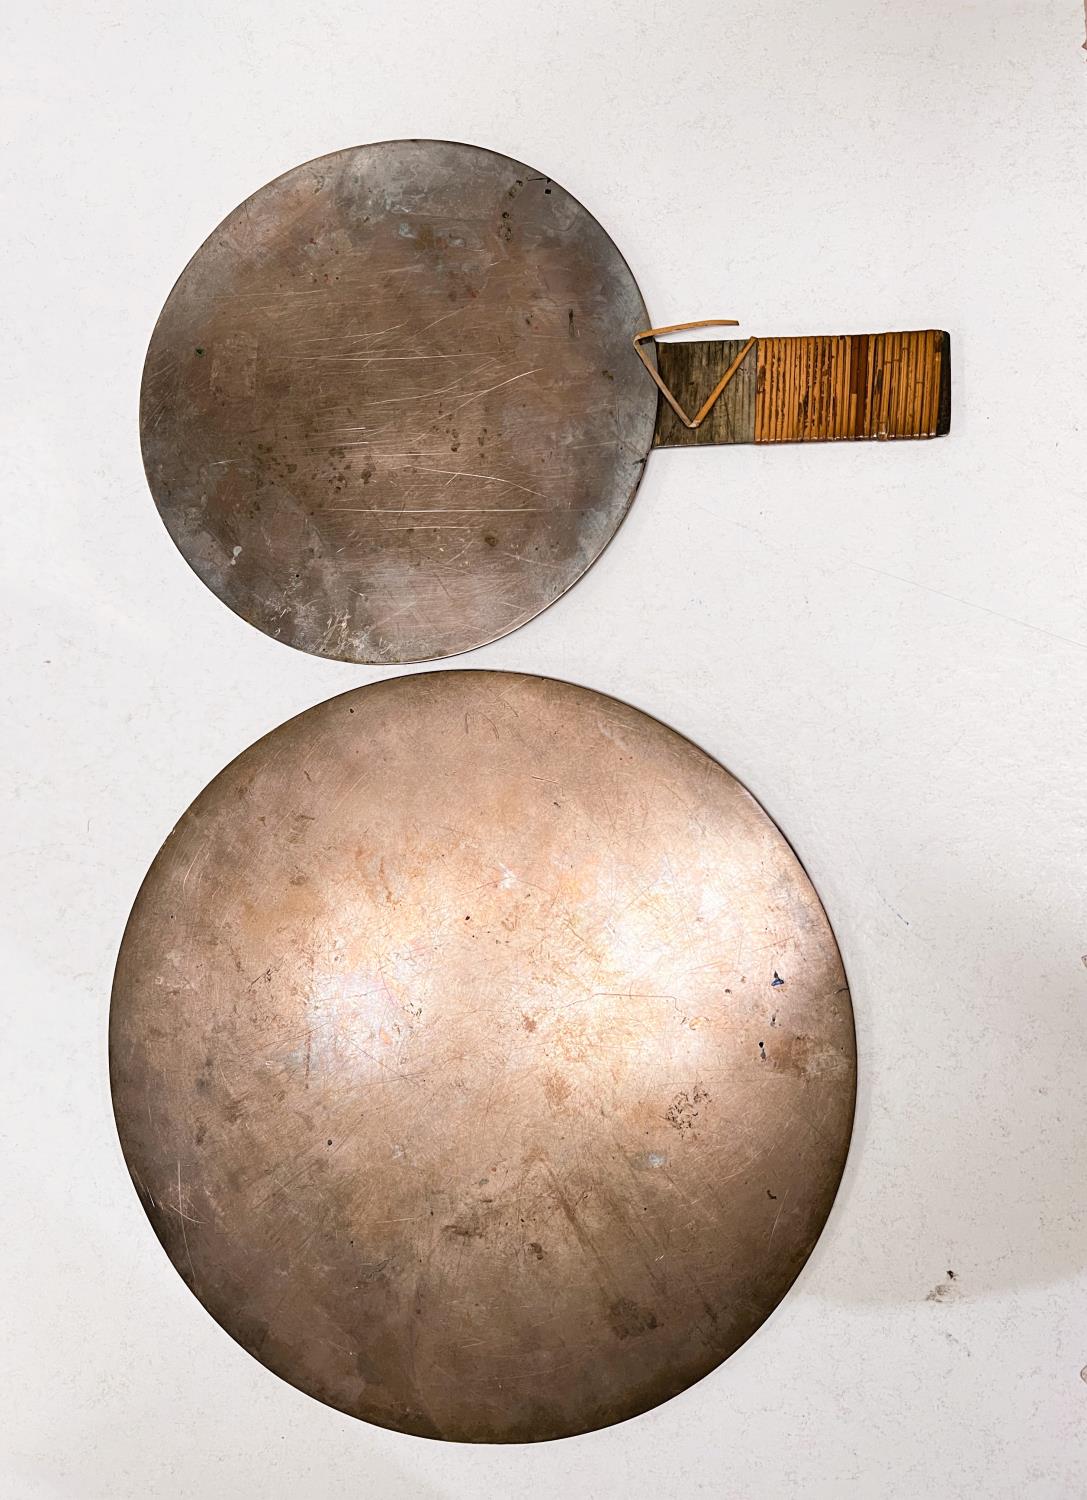 Two Chinese bronze mirrors, one highly polished side, the other embossed, one with handle